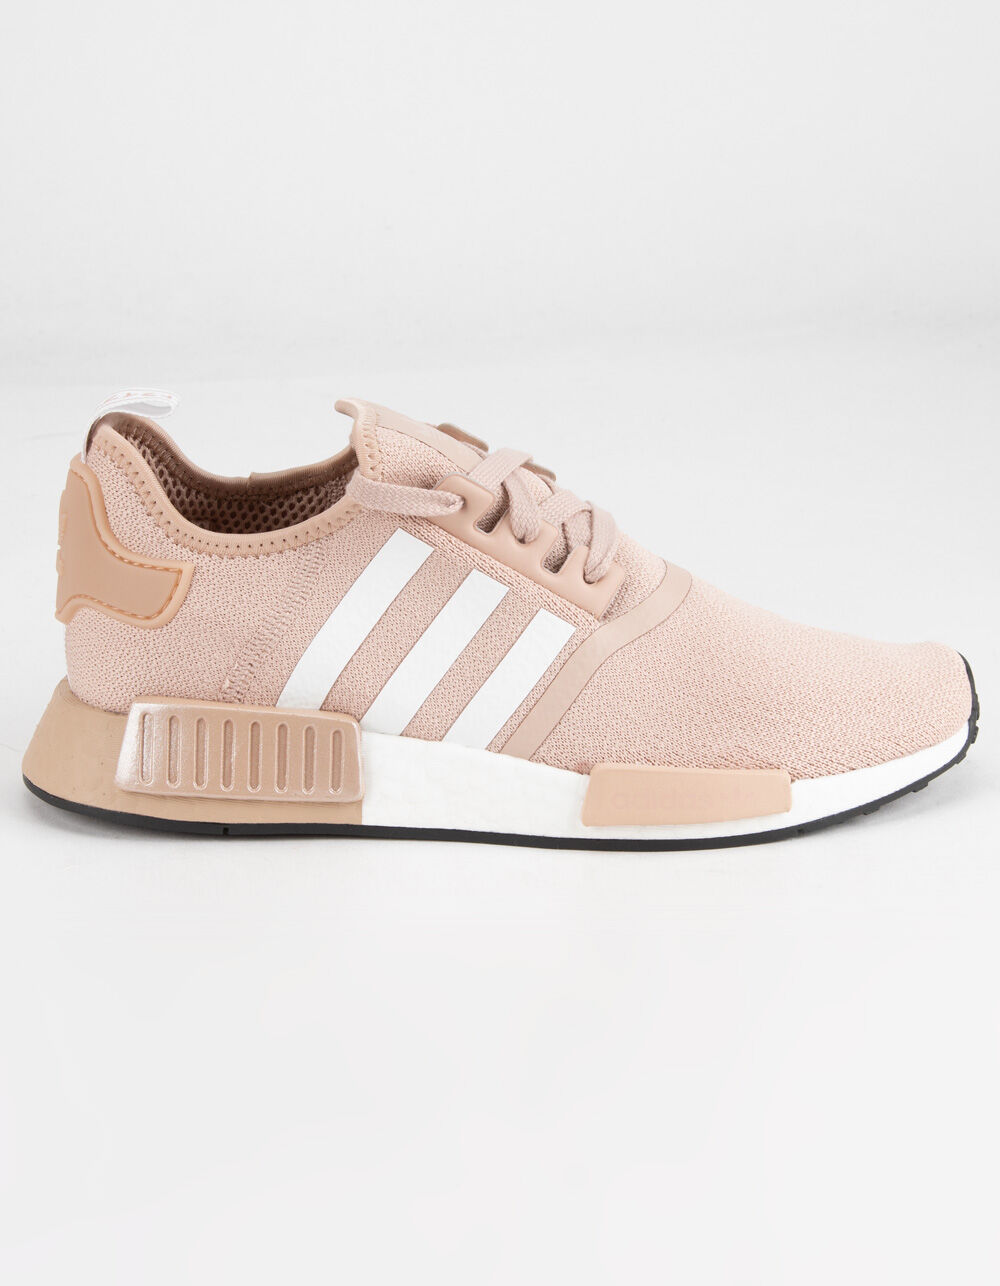 Nude Adidas Shoes for Women